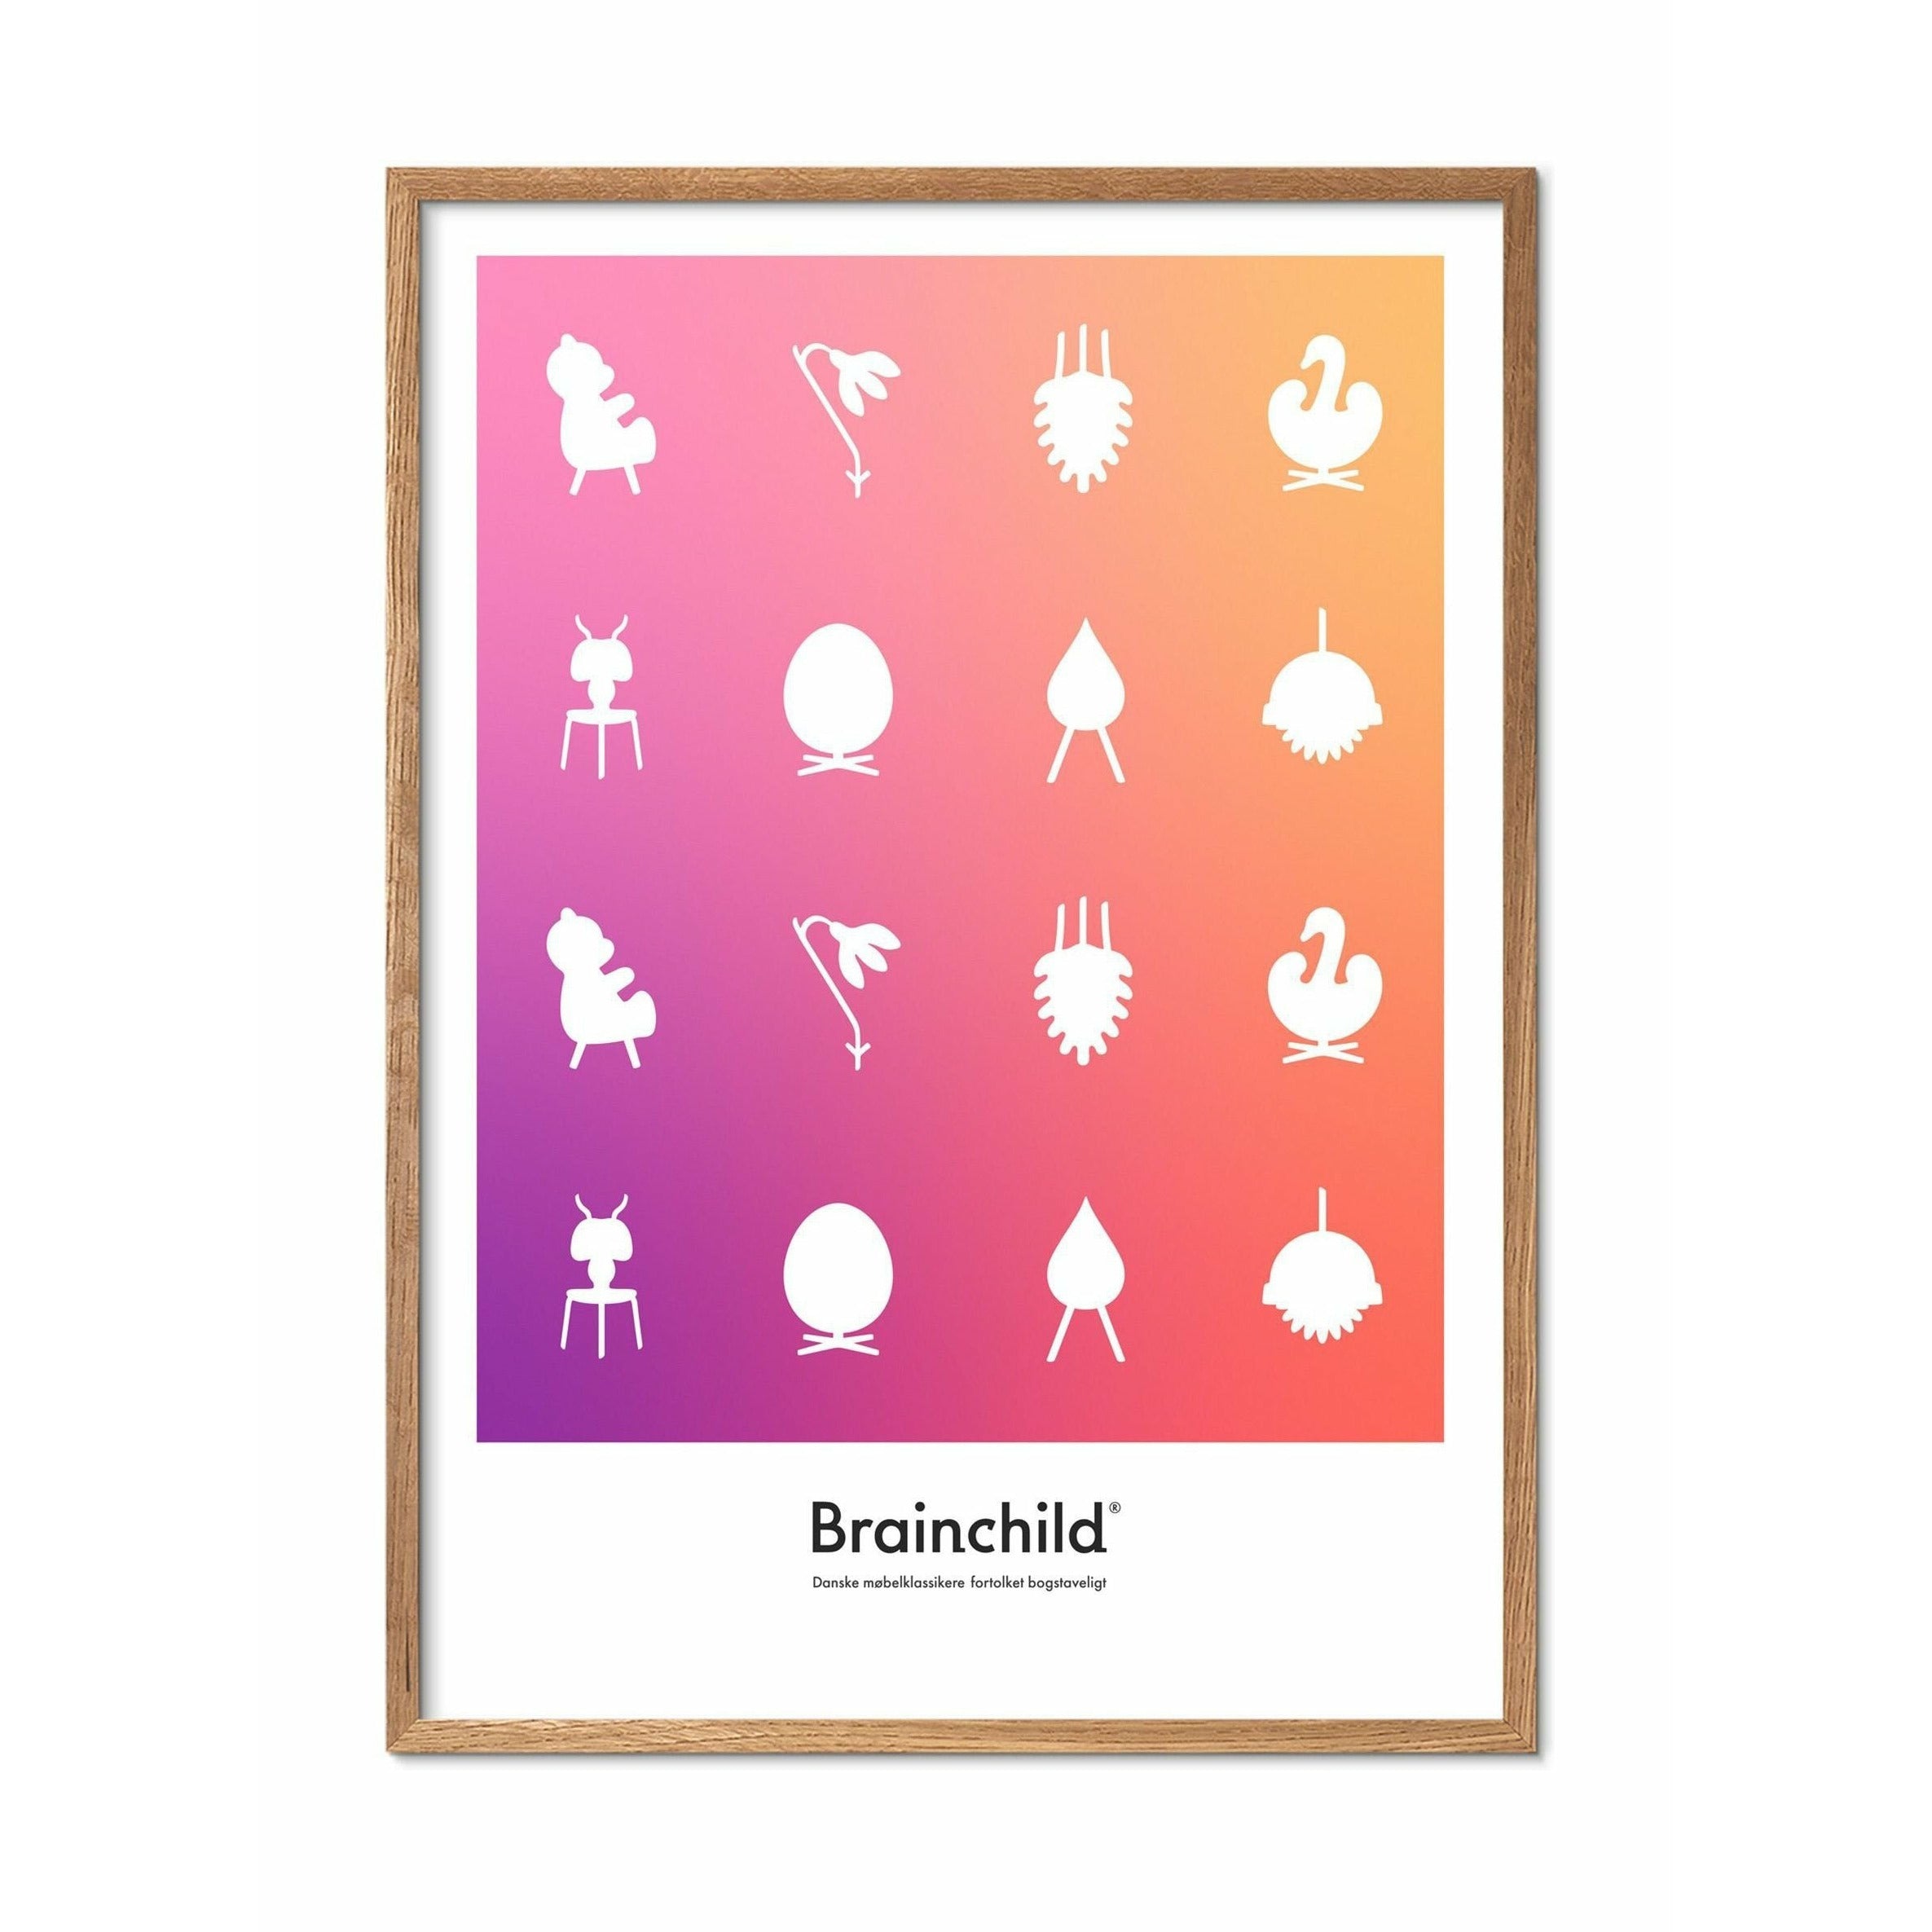 Brainchild Design Icon Poster, Frame Made Of Light Wood A5, Colour